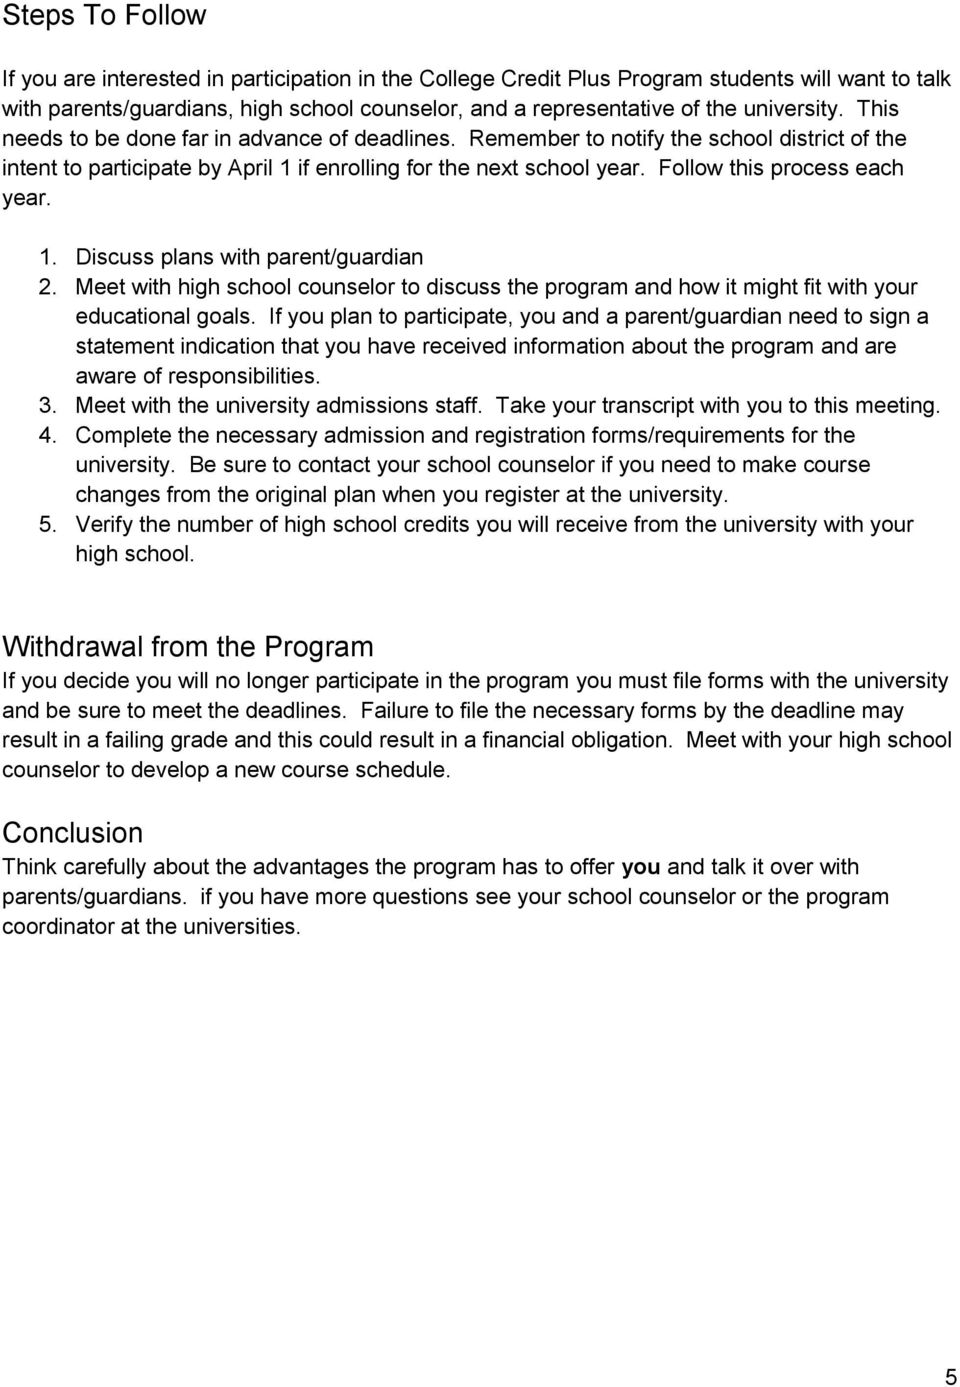 Follow this process each year. 1. Discuss plans with parent/guardian 2. Meet with high school counselor to discuss the program and how it might fit with your educational goals.